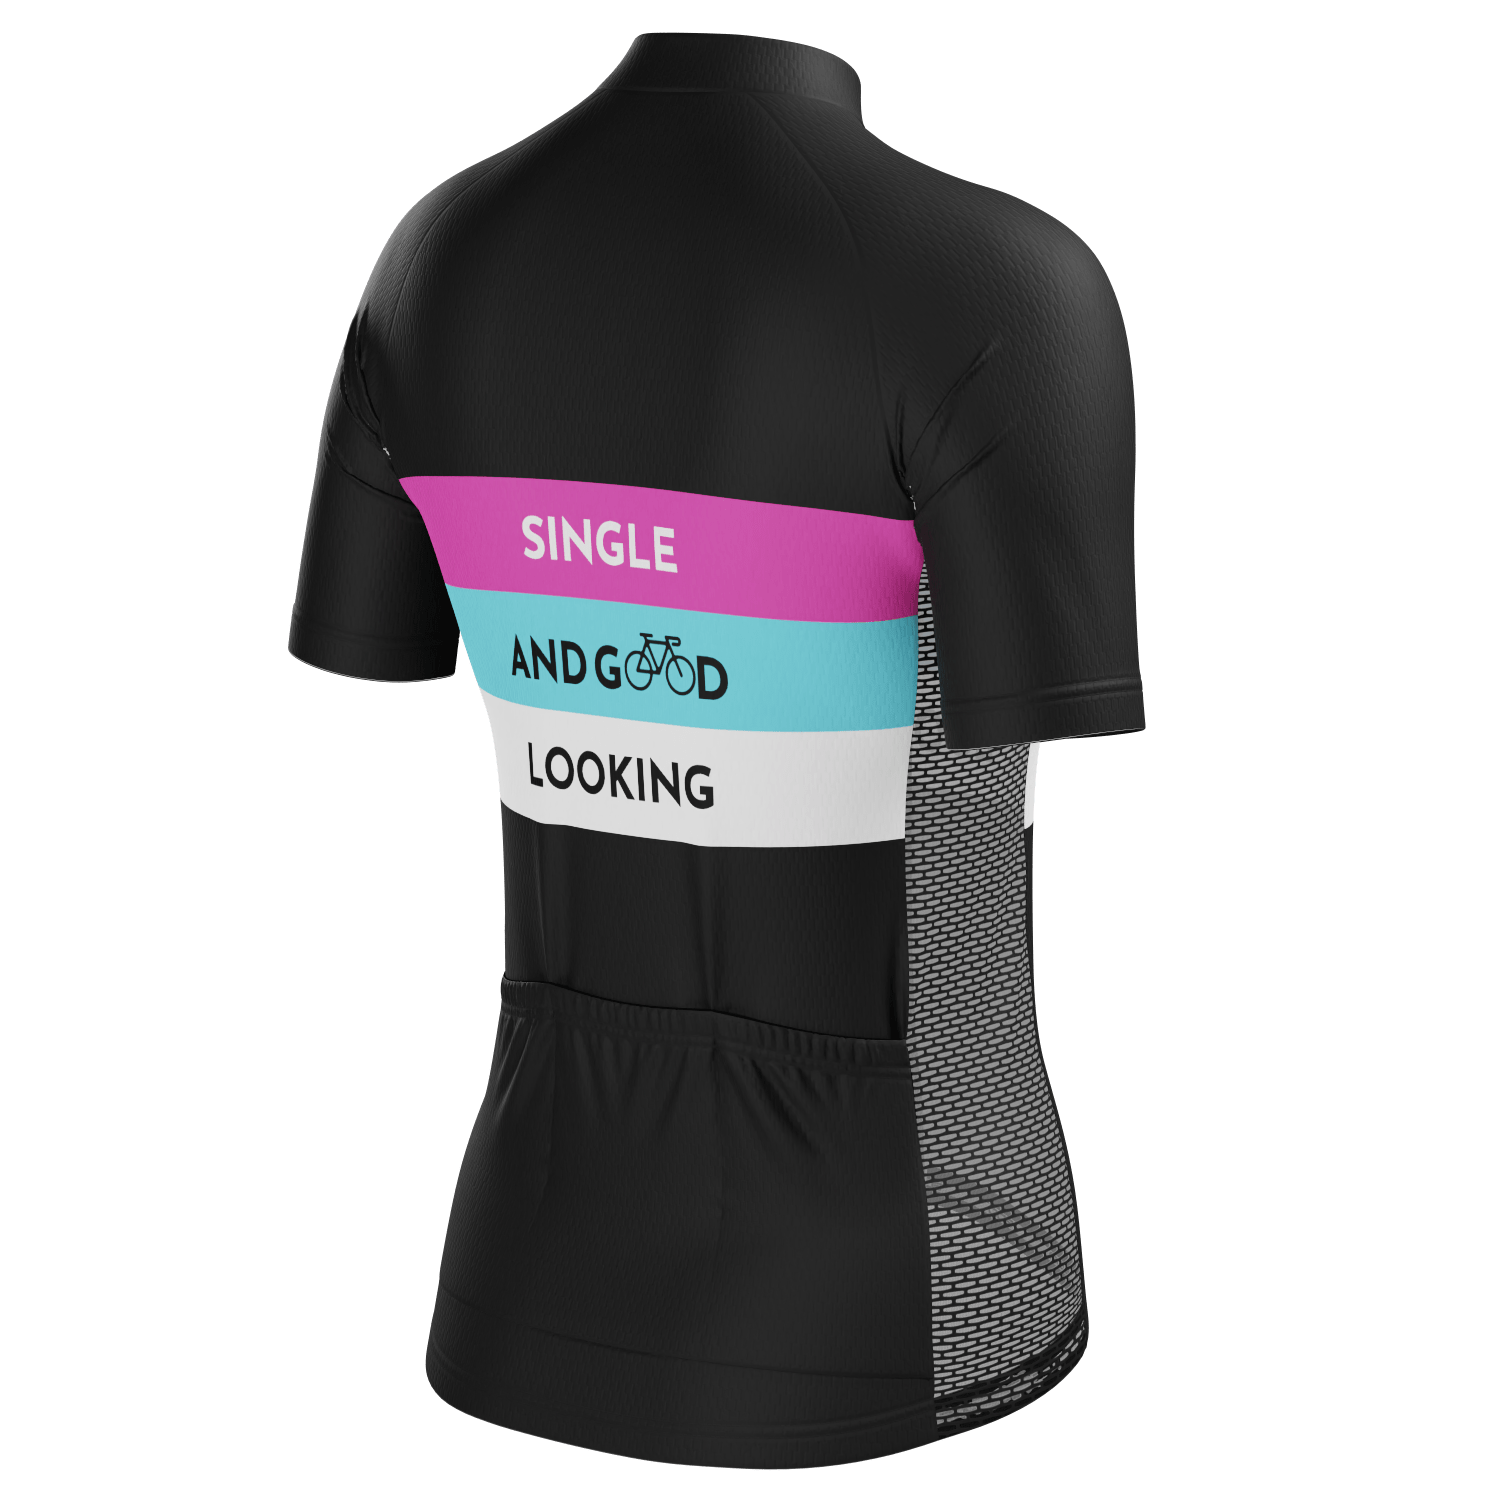 Women's Single and Good Looking Short Sleeve Cycling Jersey